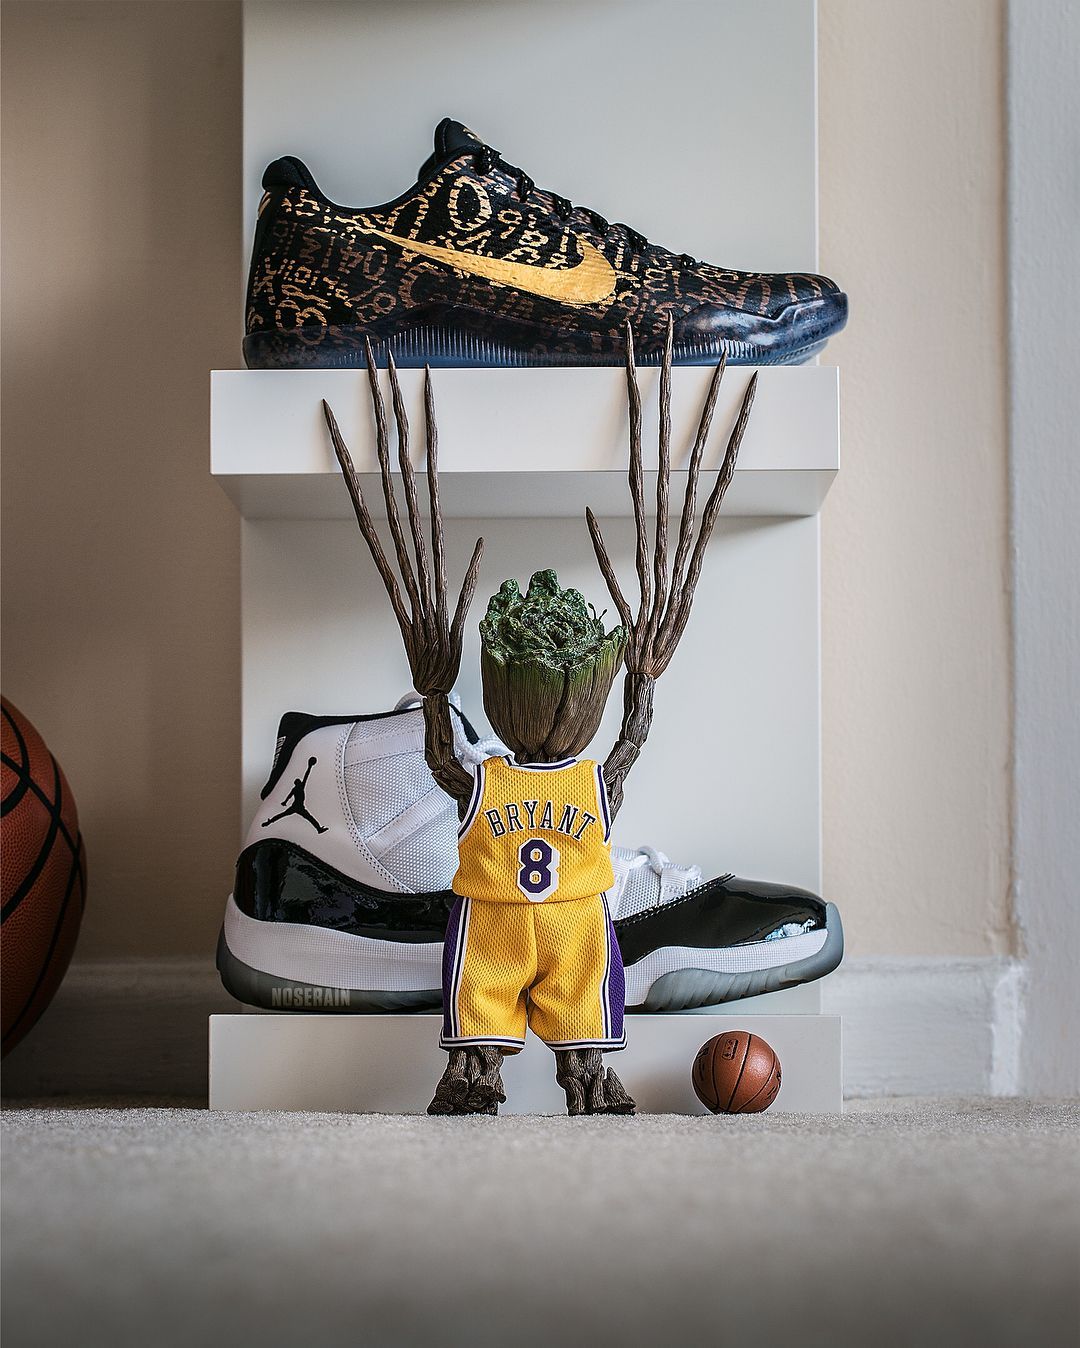 Baby Groot Loves Sneakers. Baby groot, Groot, Toys photography